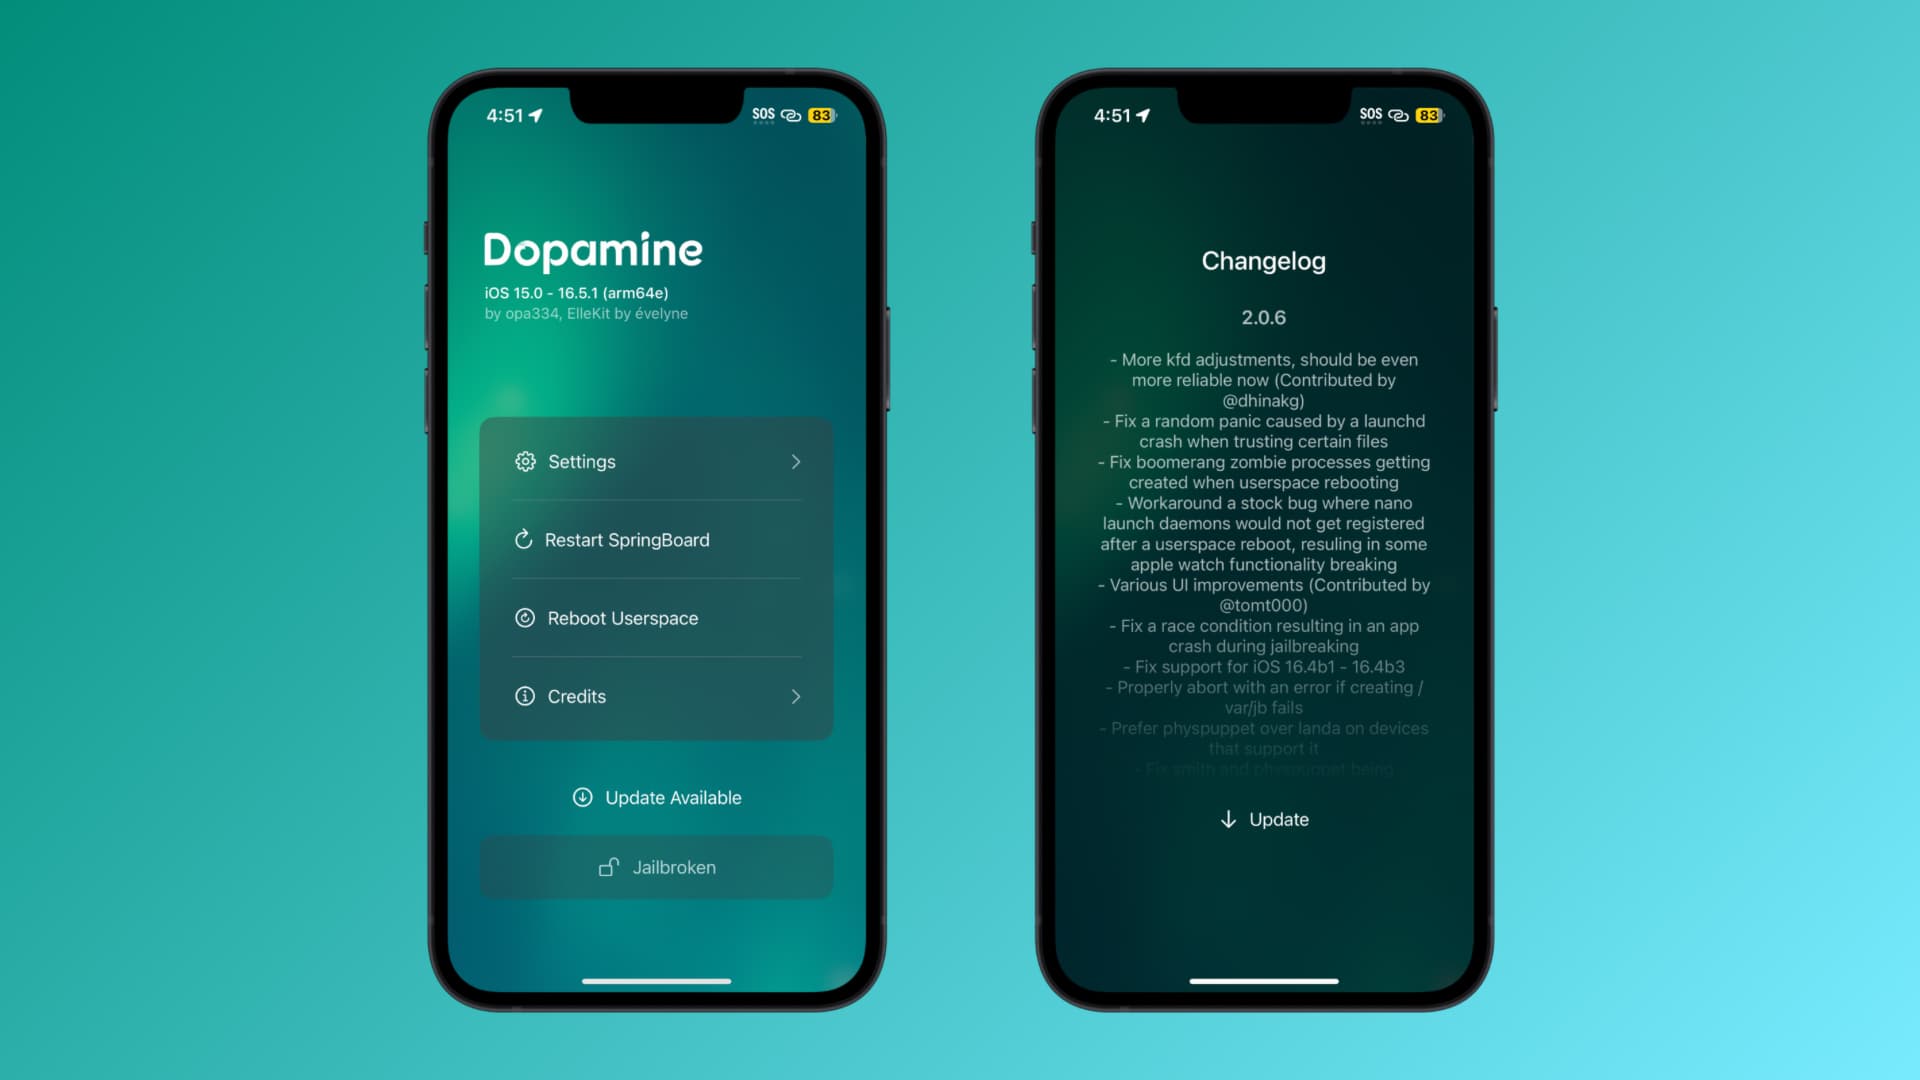 Dopamine v2.0.6 released with several enhancements to jailbreak stability and reliability